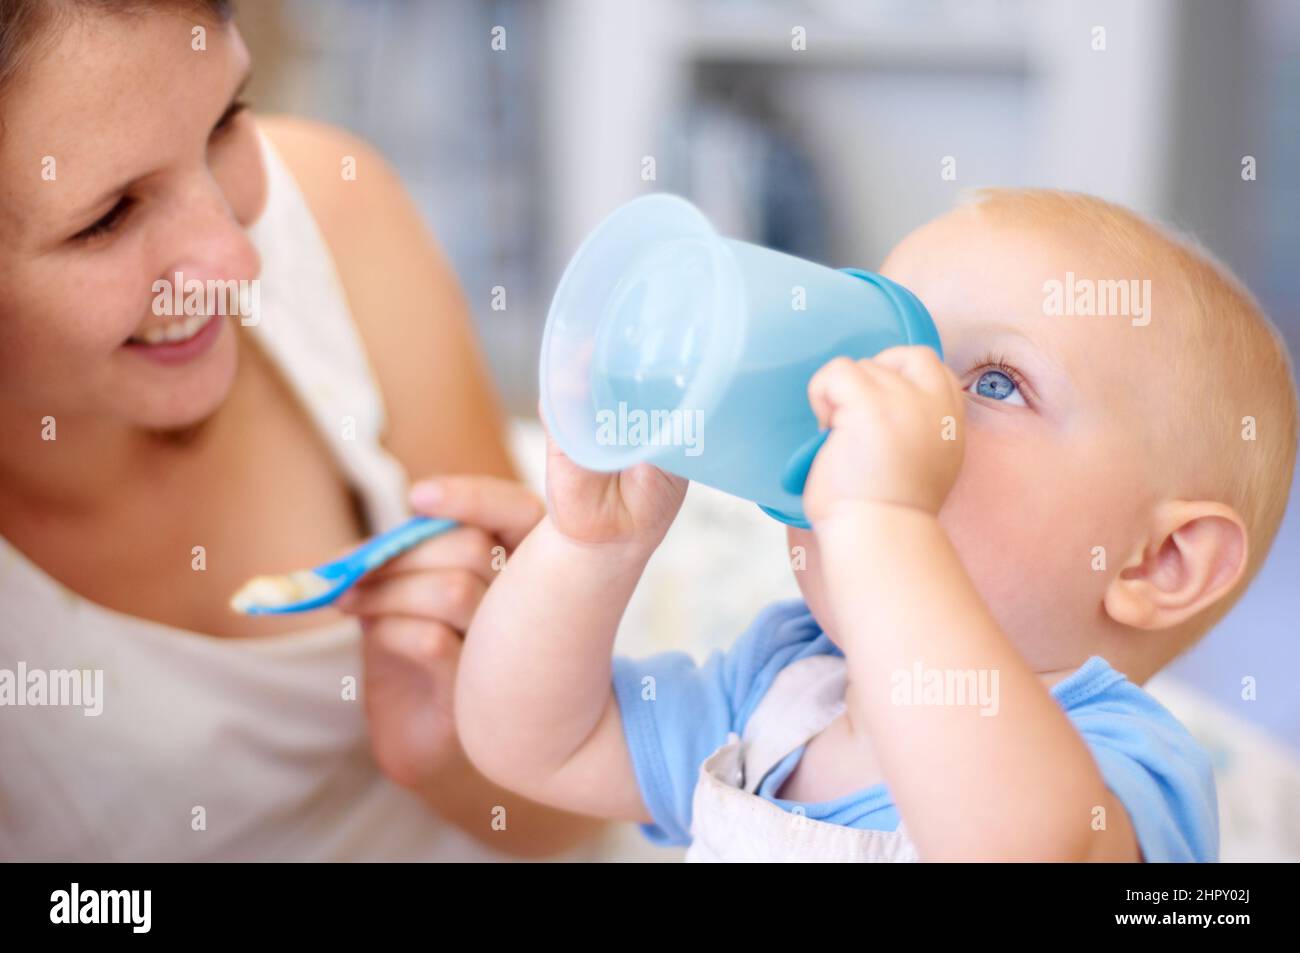 https://c8.alamy.com/comp/2HPY02J/drinking-all-by-himself-a-young-mother-watching-her-baby-boy-drink-from-his-sippy-cup-2HPY02J.jpg